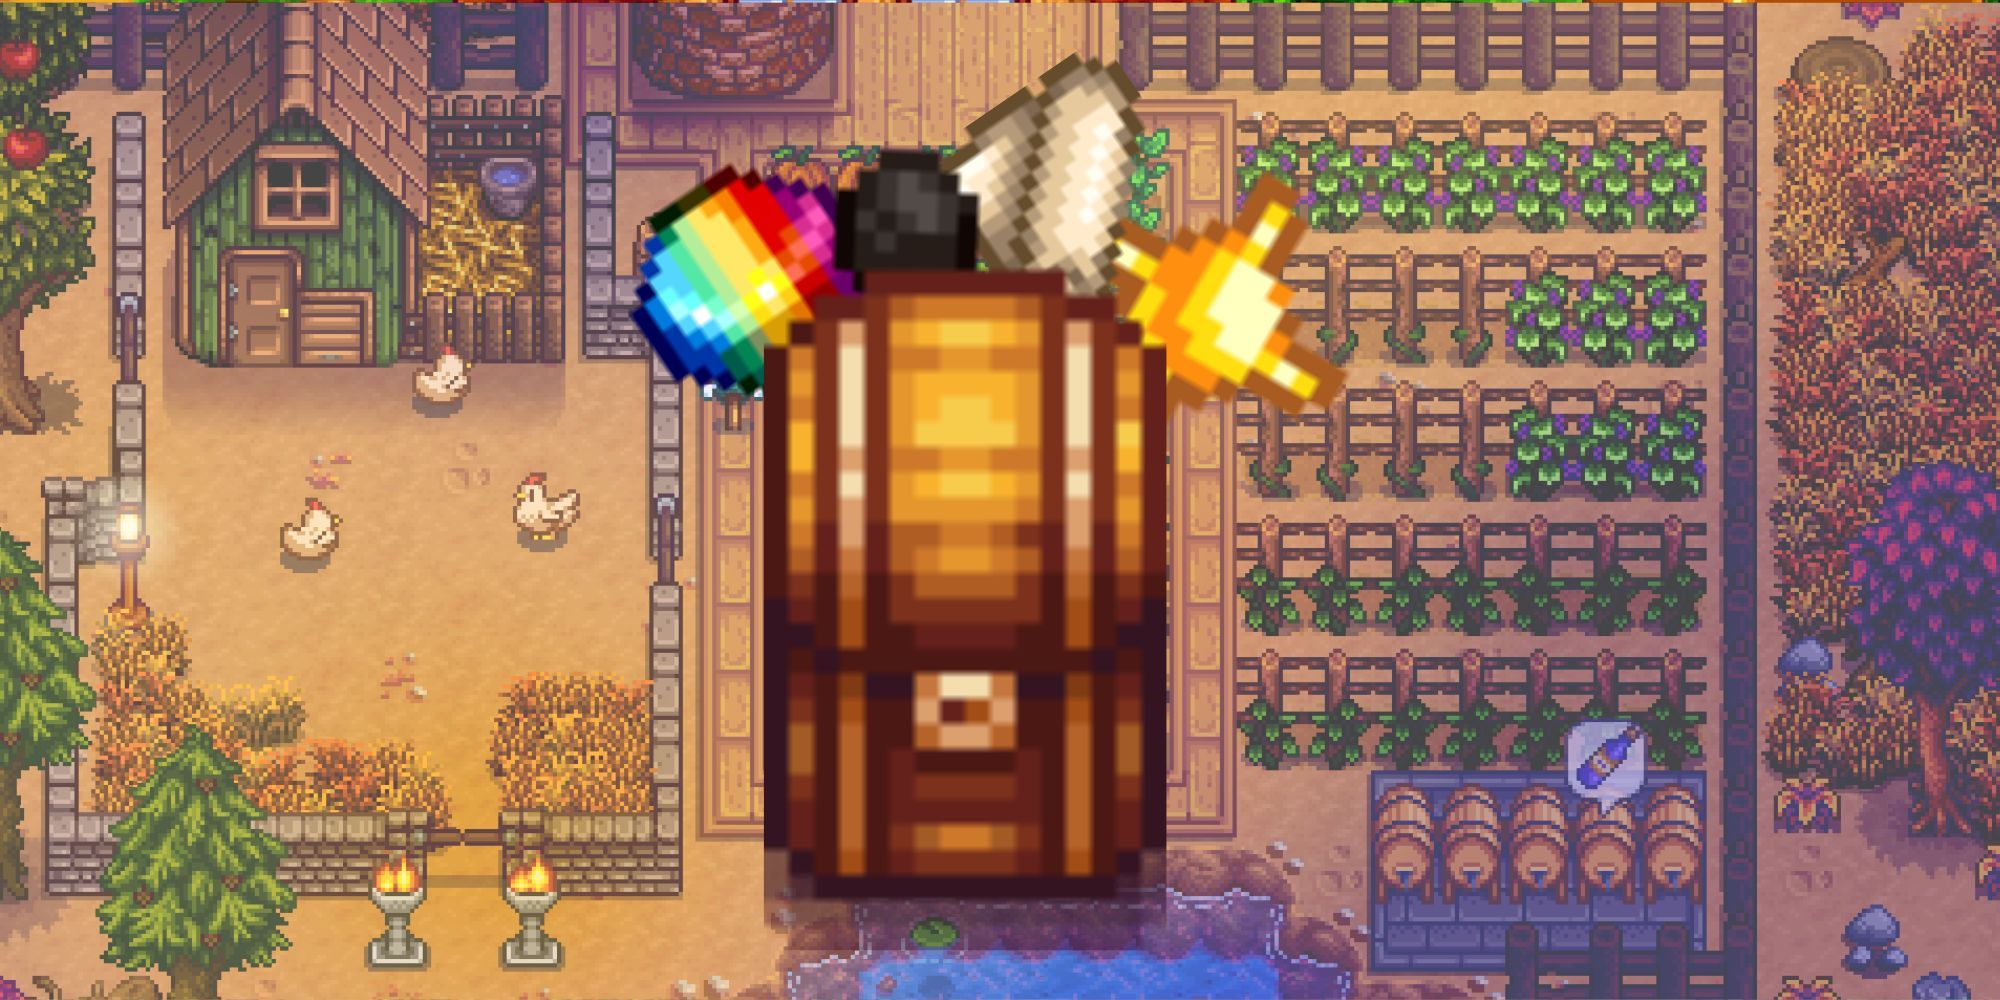 Stardew Valley Player Discovers Trigger For Annoying 1.6 Update Glitch